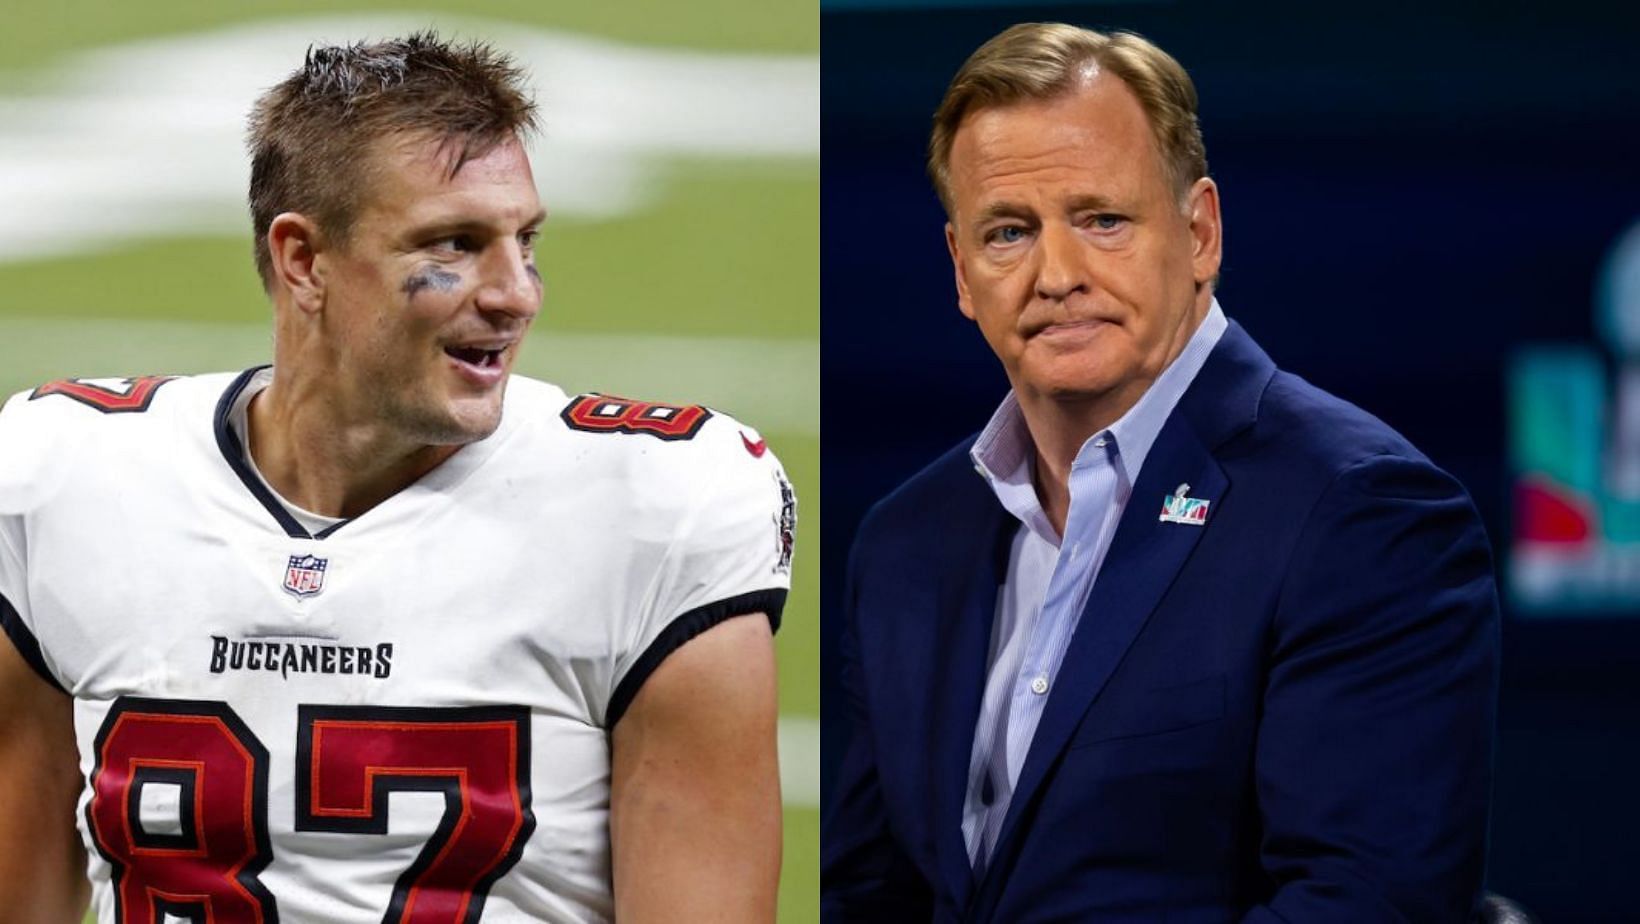 Gronkowski is not happy with Goodell